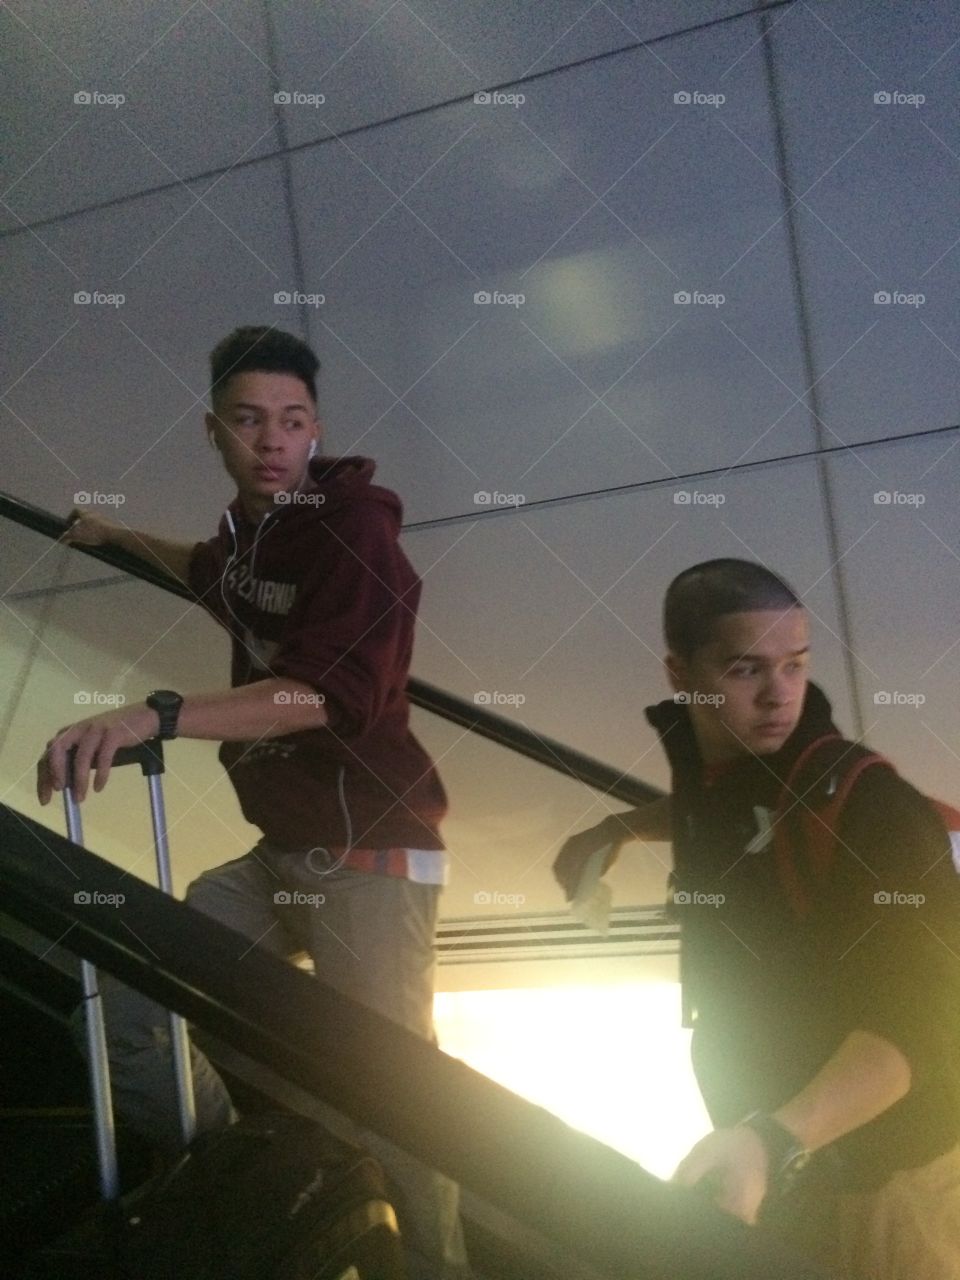 Two young man standing on escalator